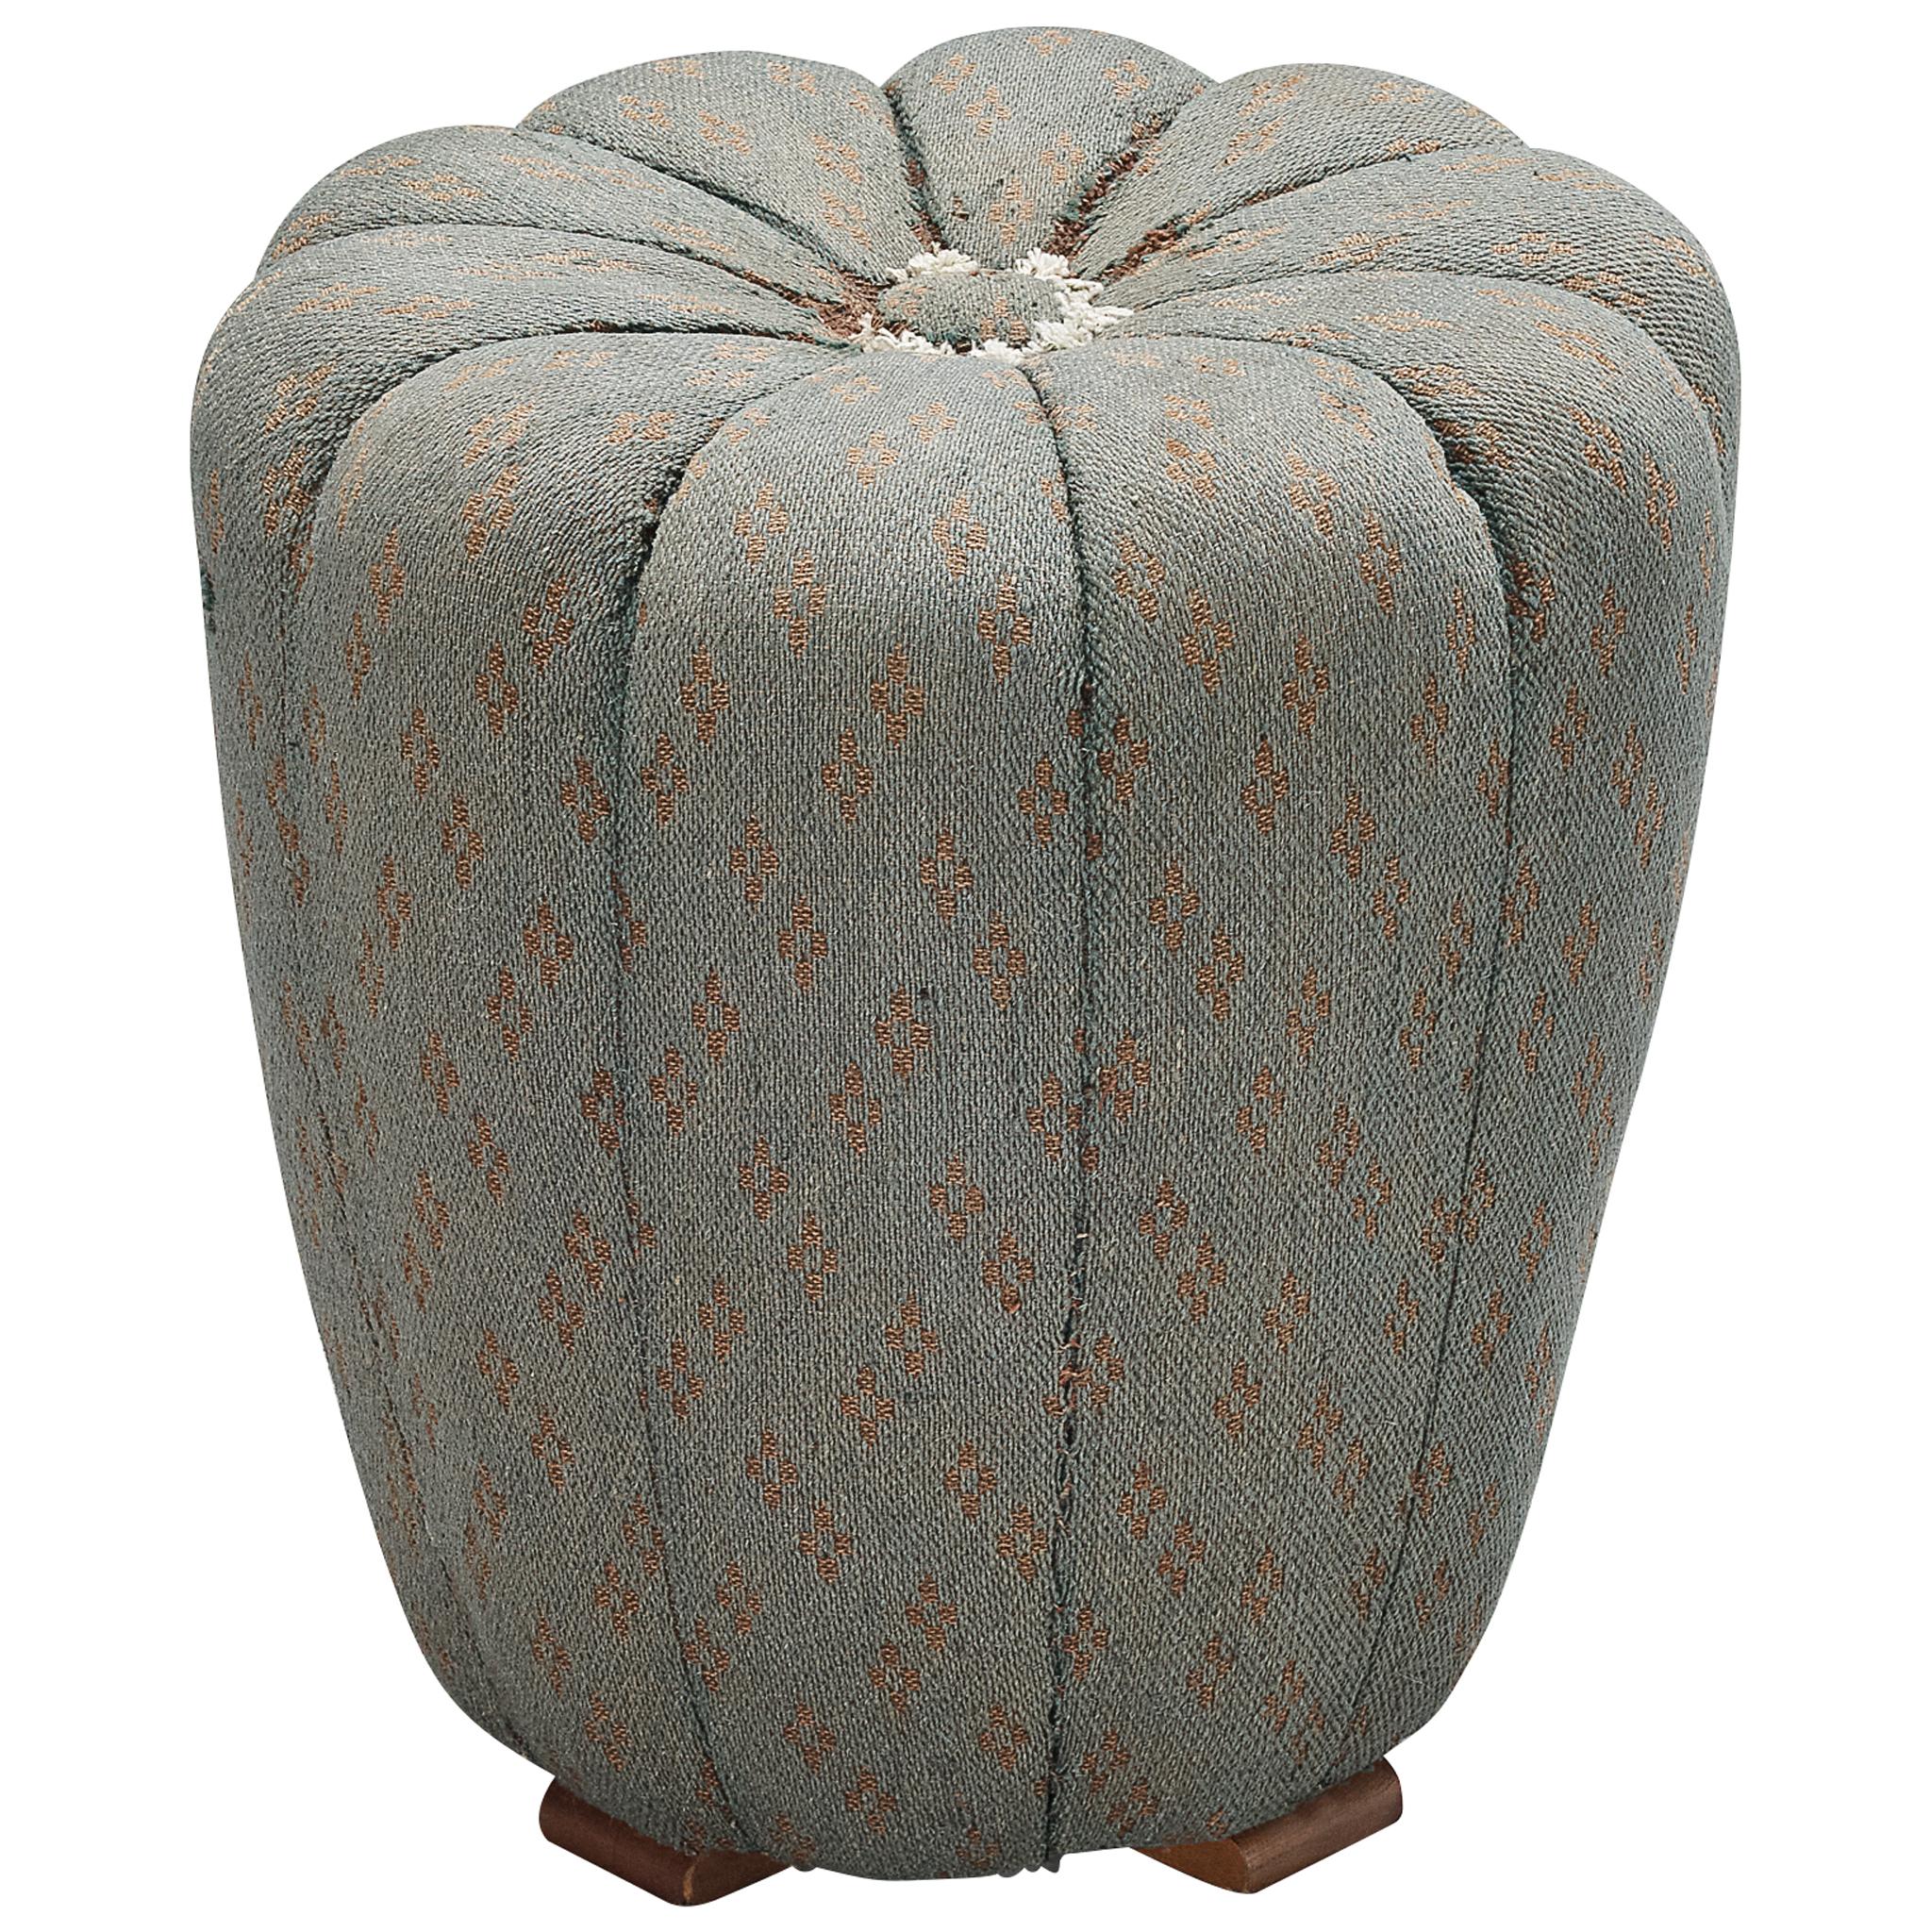 This poetic pouf is designed in the 1930s when the Art Deco Period was at its highest point and distinguishes itself by means of artistic upholstery that retained its original fabric and interesting construction. Halabala created a harmonious pouf